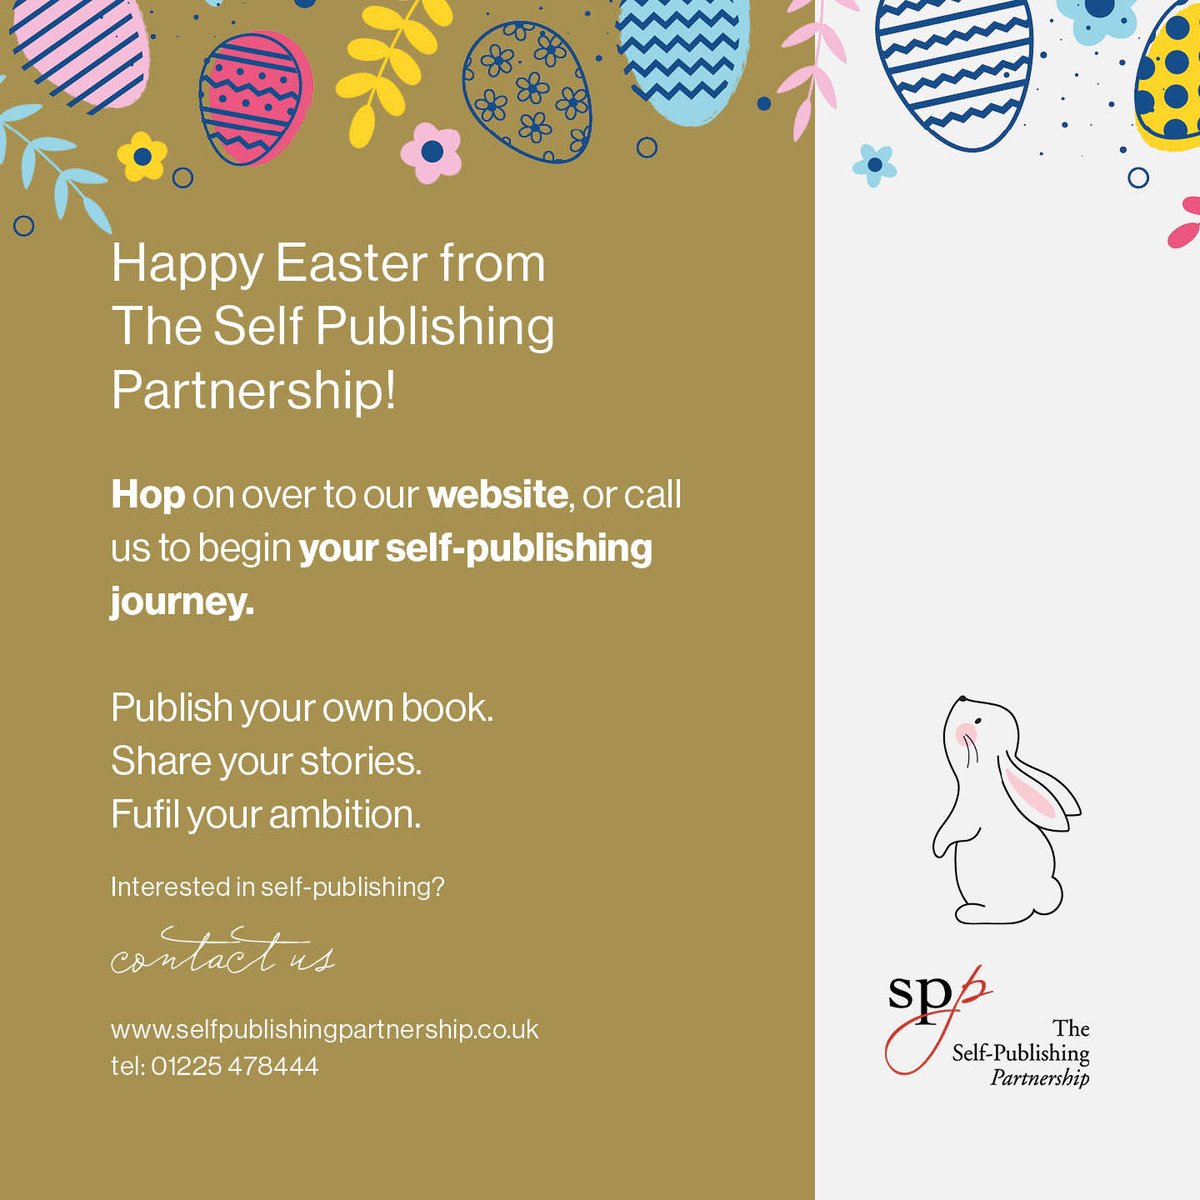 Wishing everybody a Happy Easter from The Self Publishing Partnership. 🐣🐤 #selfpublishing #selfpublished #author #easter2024 #publishing #reading #writing #books #BooksWorthReading